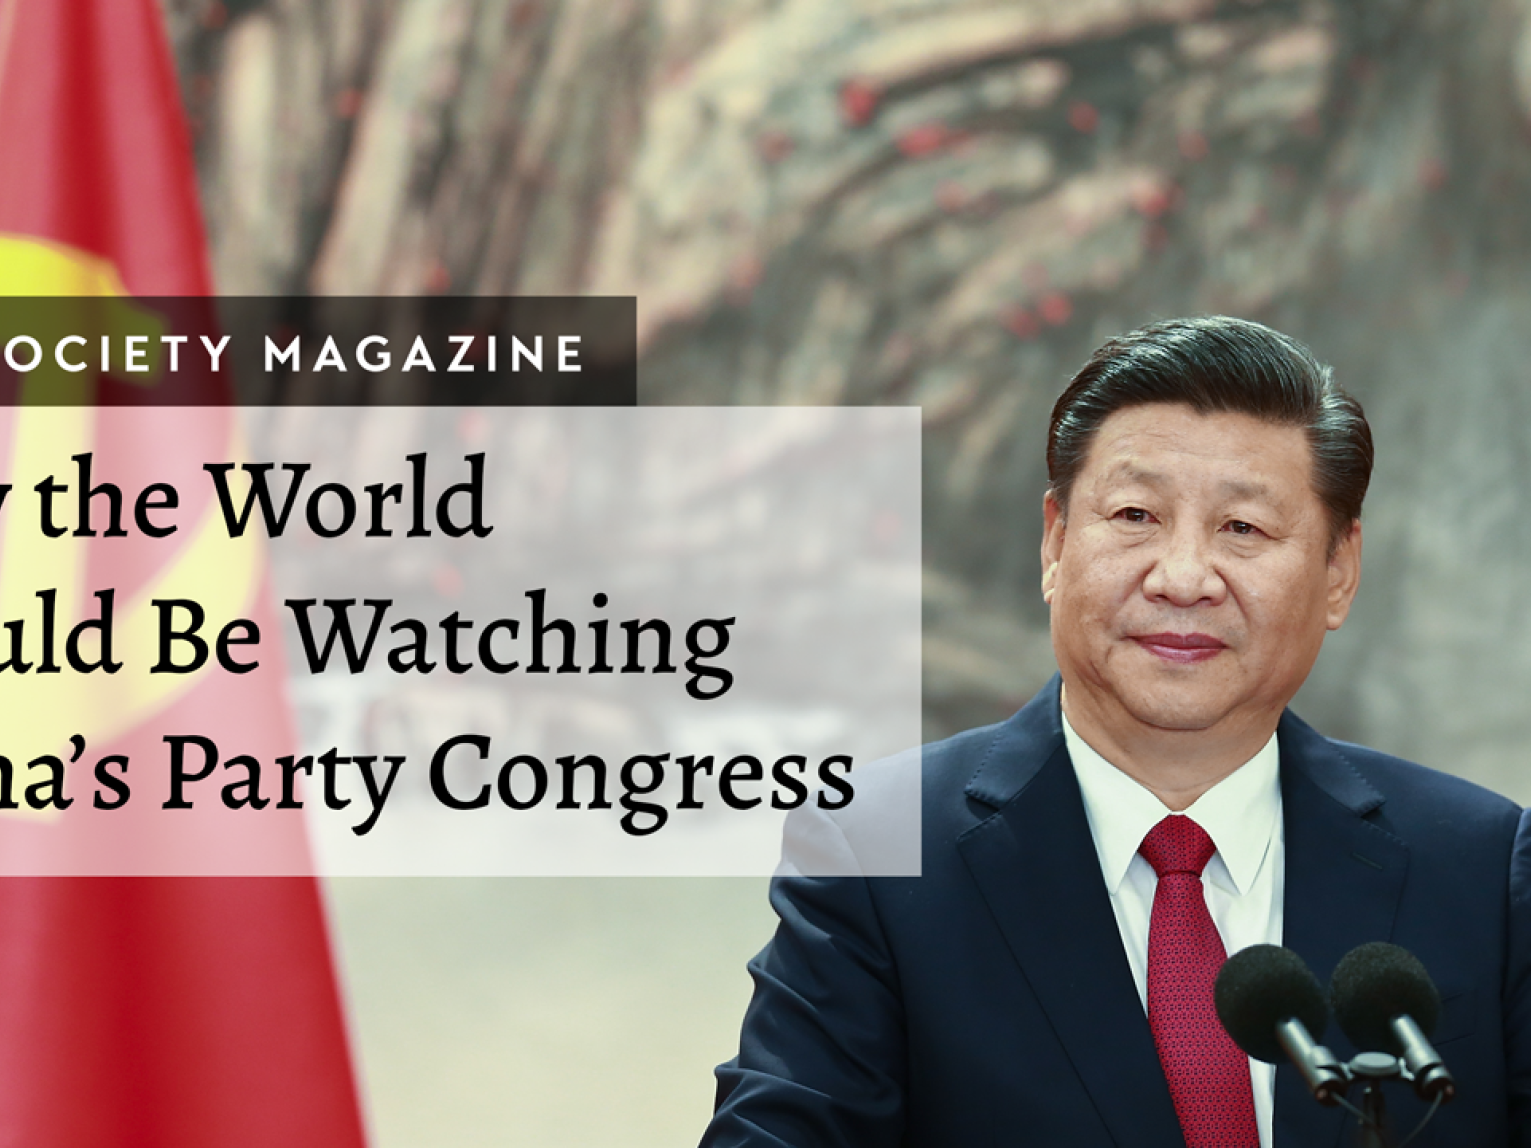 Why the World Should Be Watching China's Party Congress